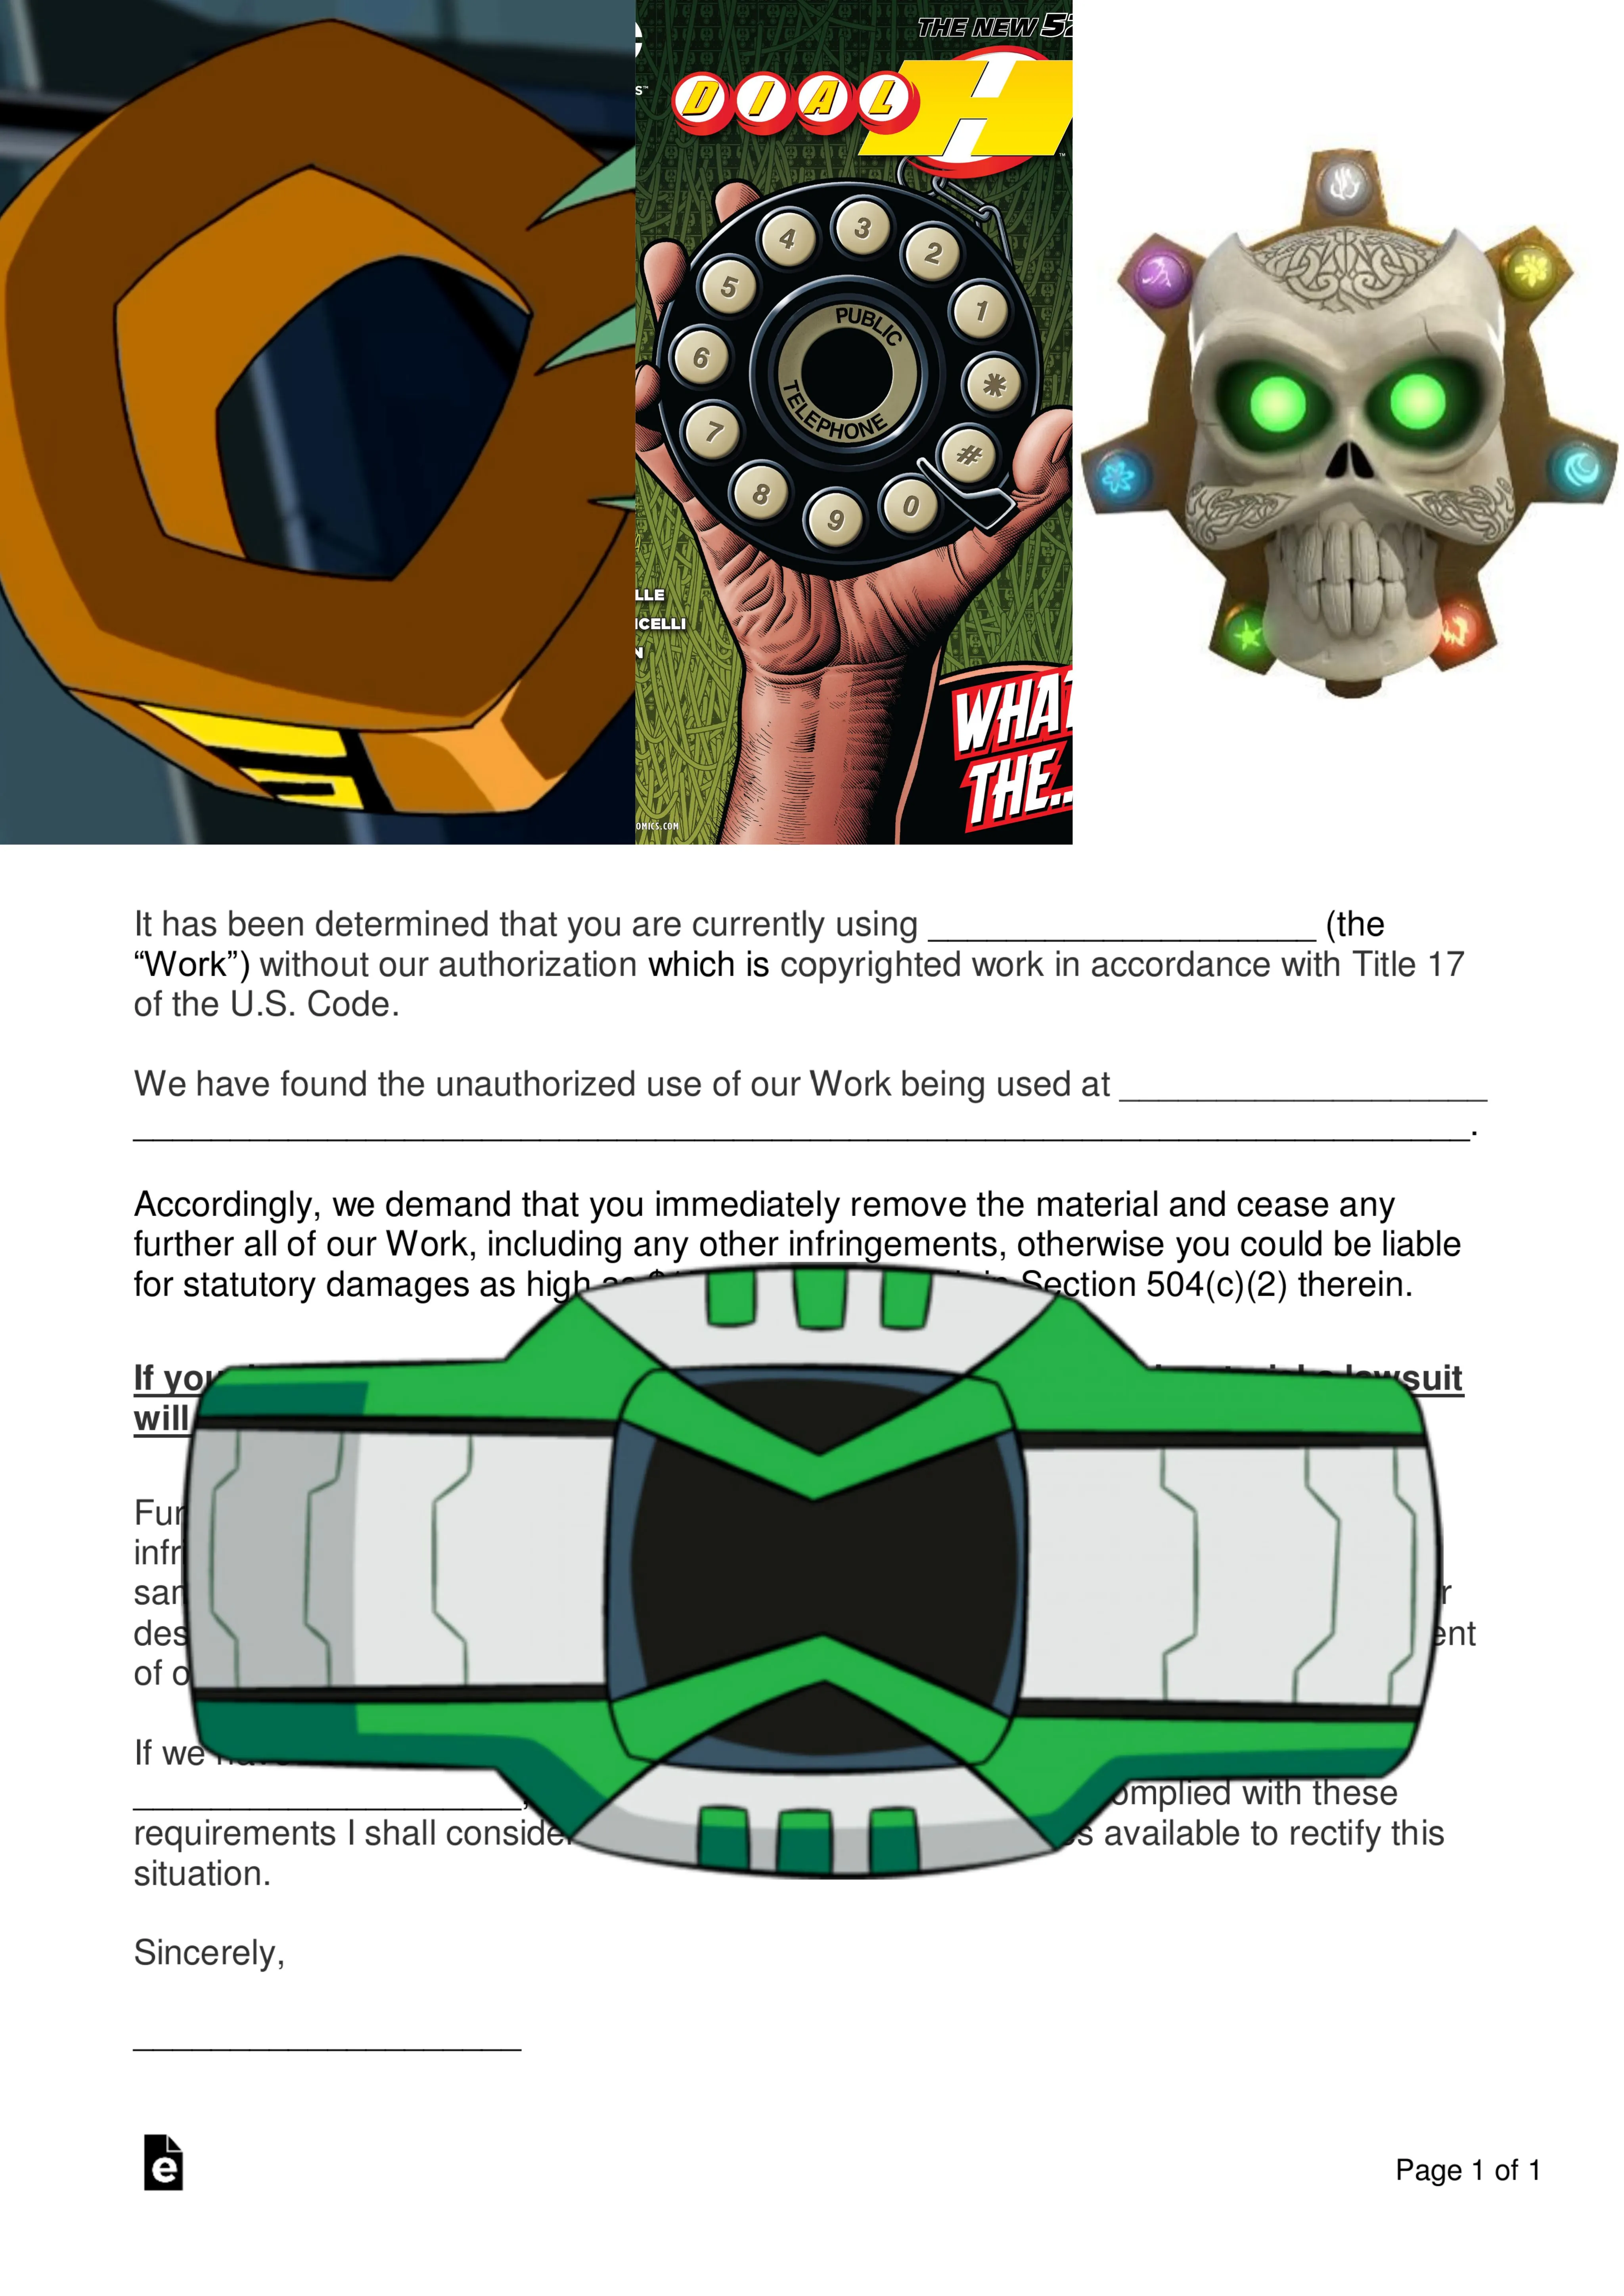 Man of Action is nothing but plagiarizing garbage. You look me in the eye  and tell me the Omnitrix isn't a rip off of these spectacular devises. I  feel absolutely betrayed and